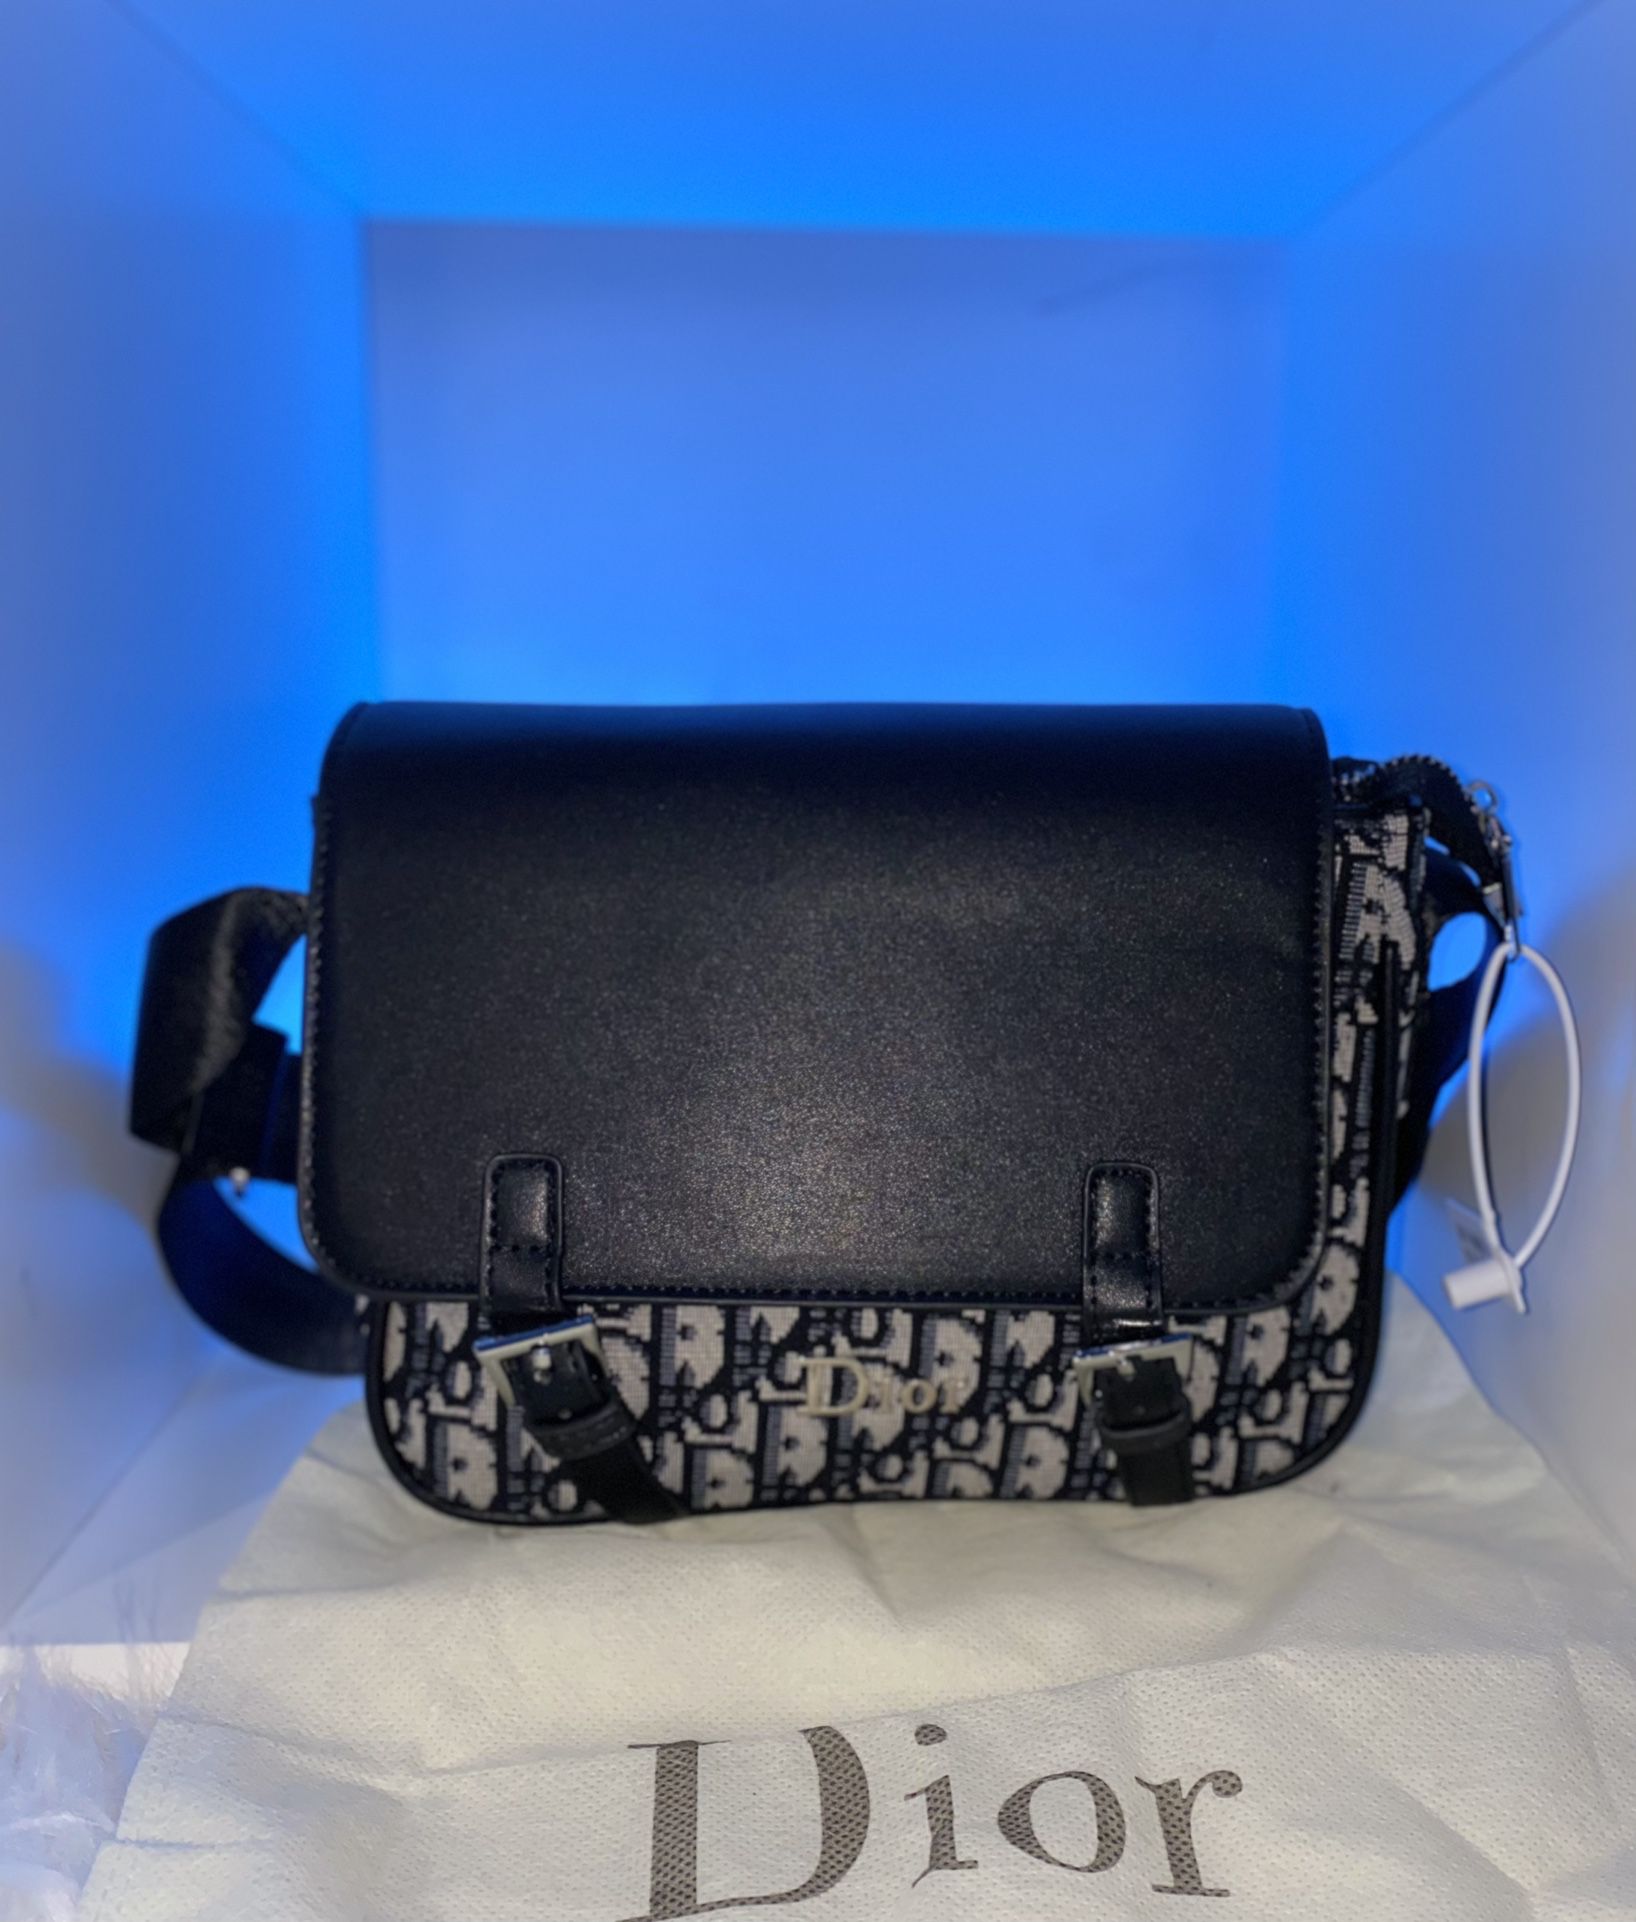 Louis Vuitton Hand Bag for Sale in Irwindale, CA - OfferUp